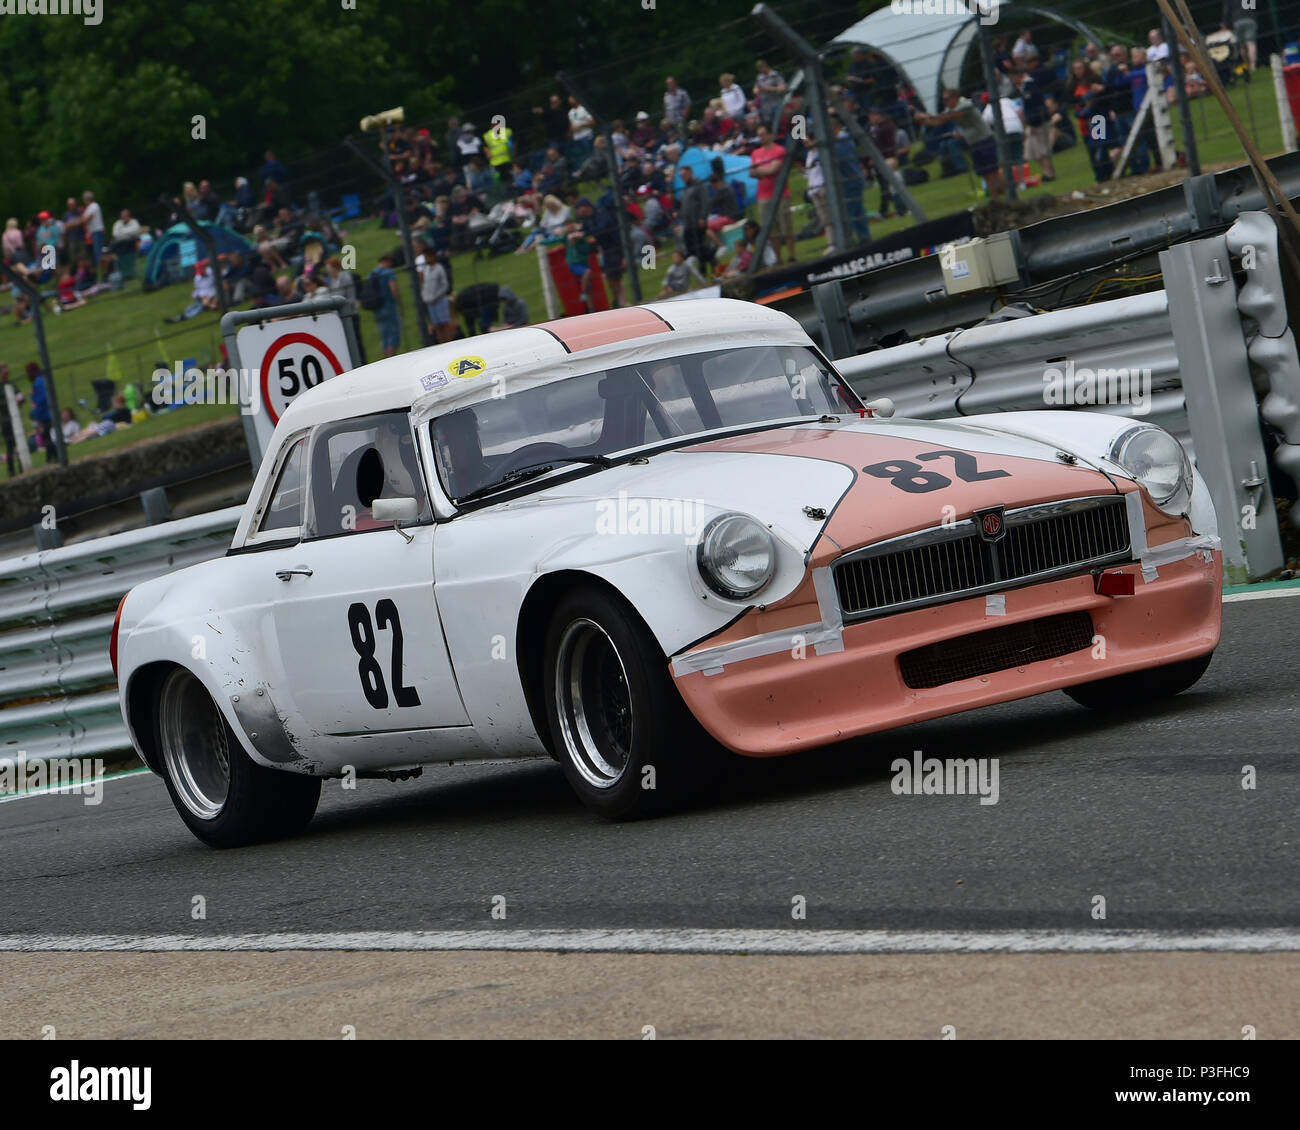 Andrew Riley, MGB V8, Bernie's V8s, US Muscle Cars, American Speedfest VI, Brands Hatch, June 2018, automobiles, Autosport, cars, circuit racing, Engl Stock Photo